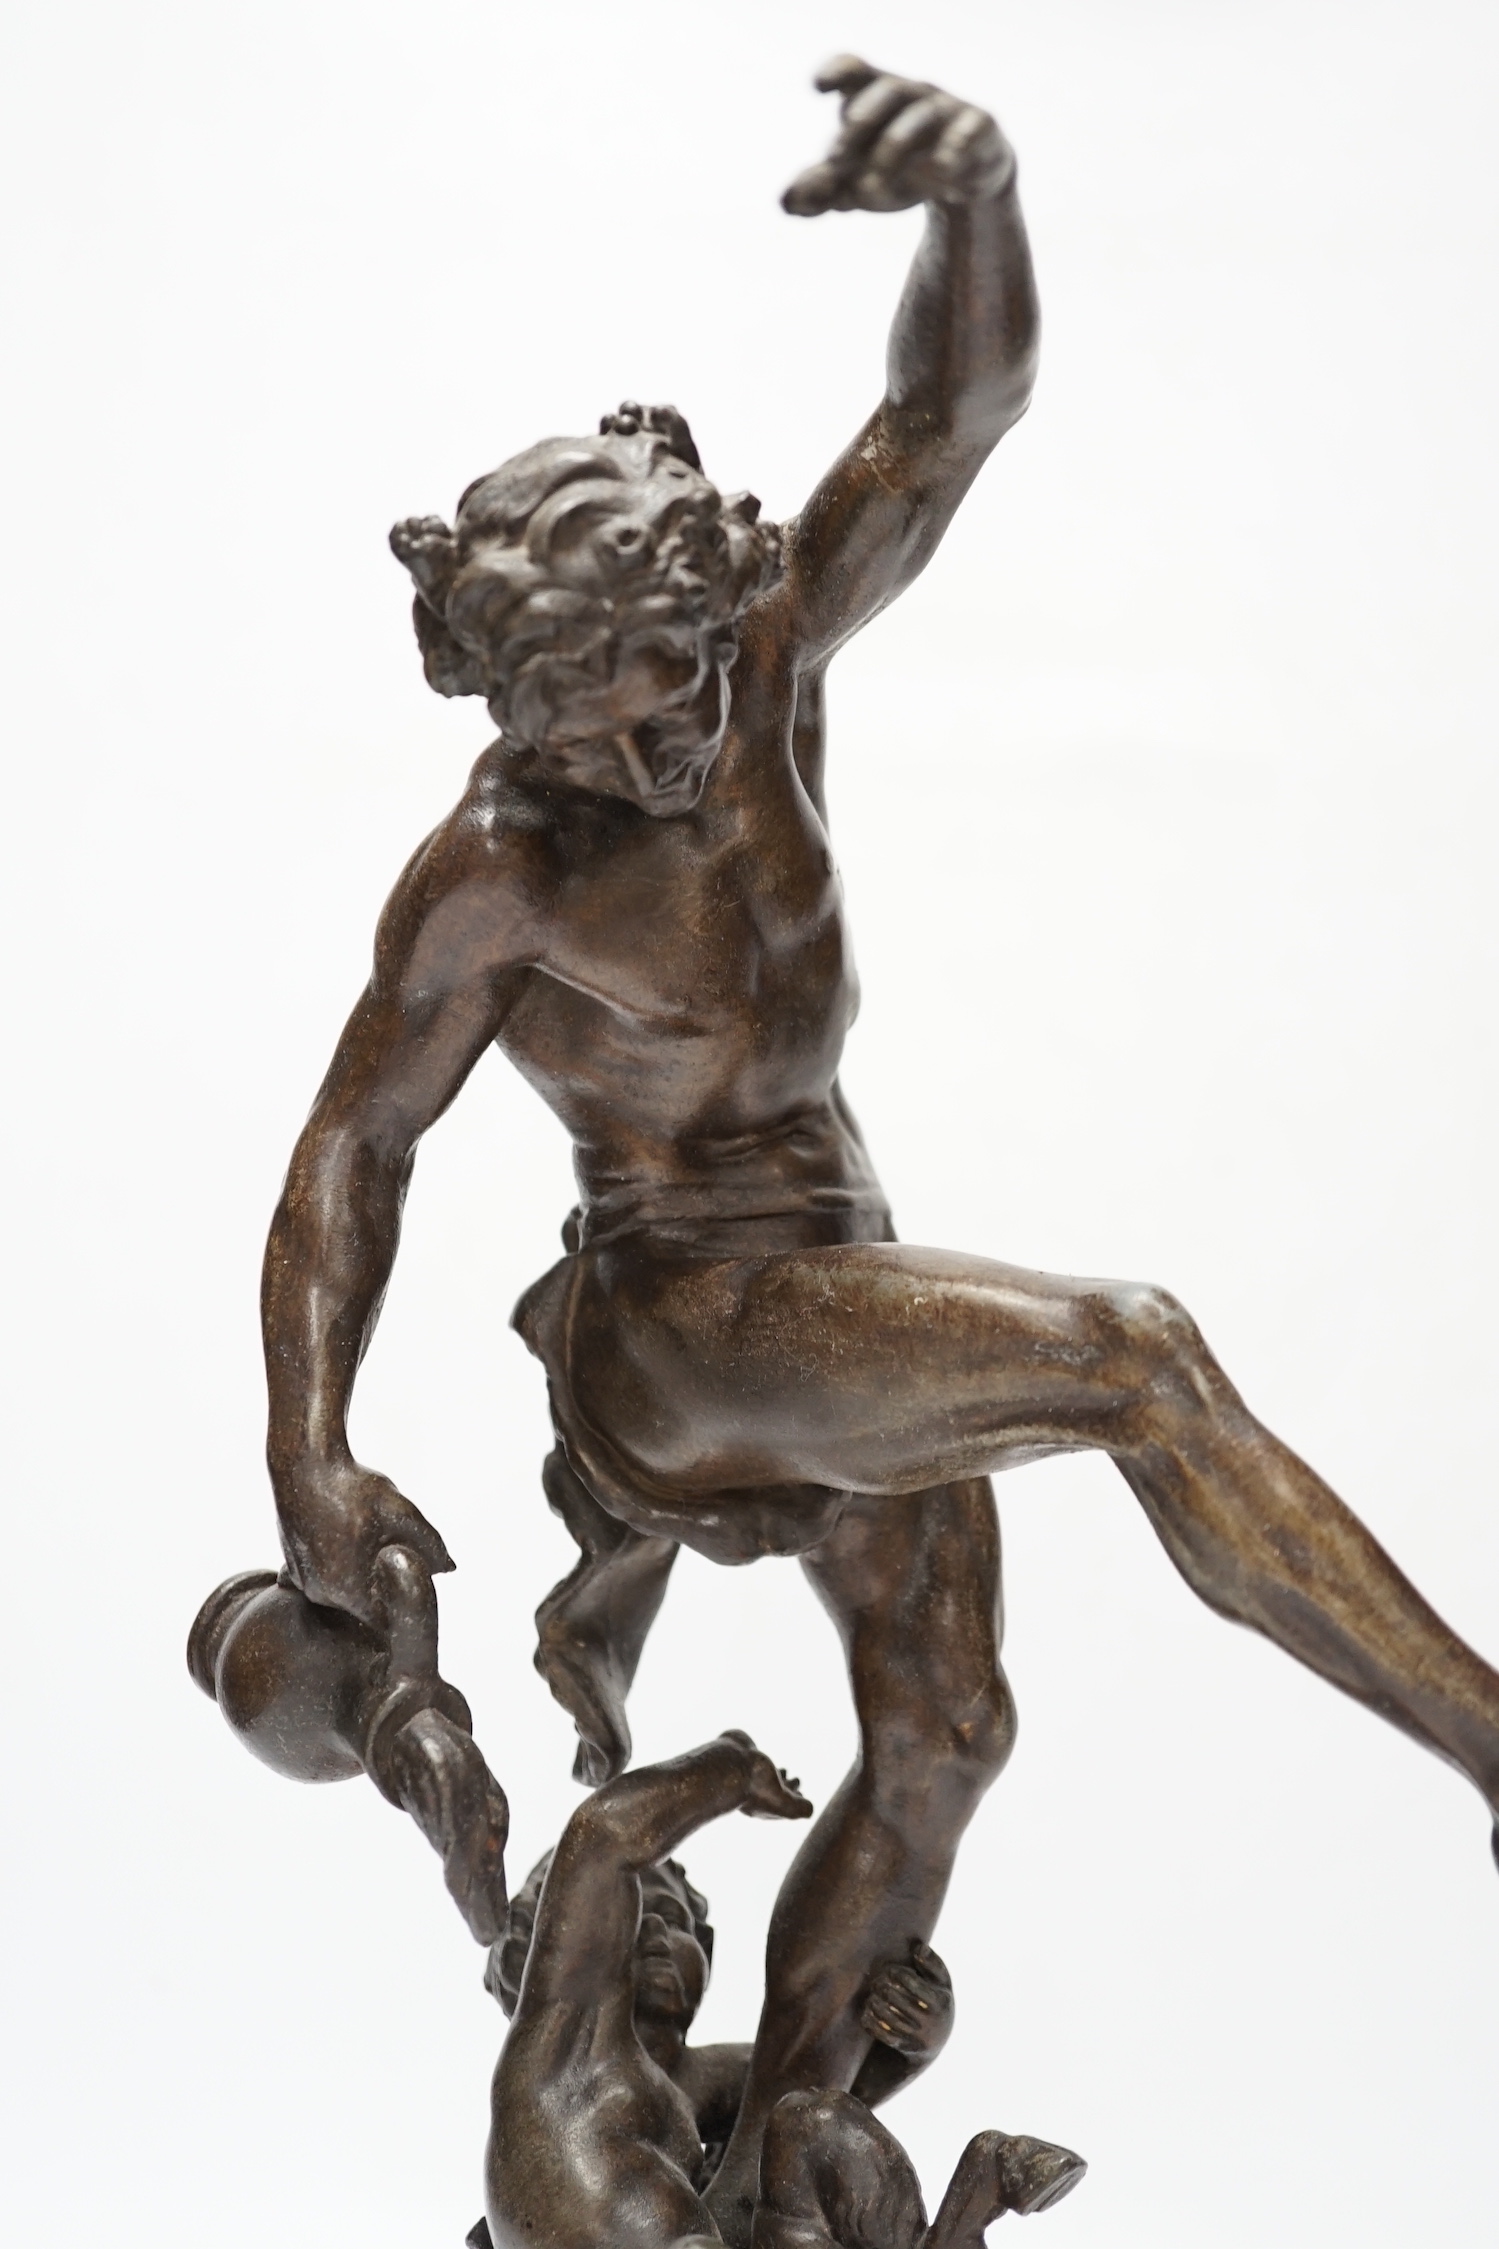 A bronzed spelter dancing figure of Bacchus - ‘Le Vin’, with a fawn and bunches of grapes, on a marble base, 36cm high